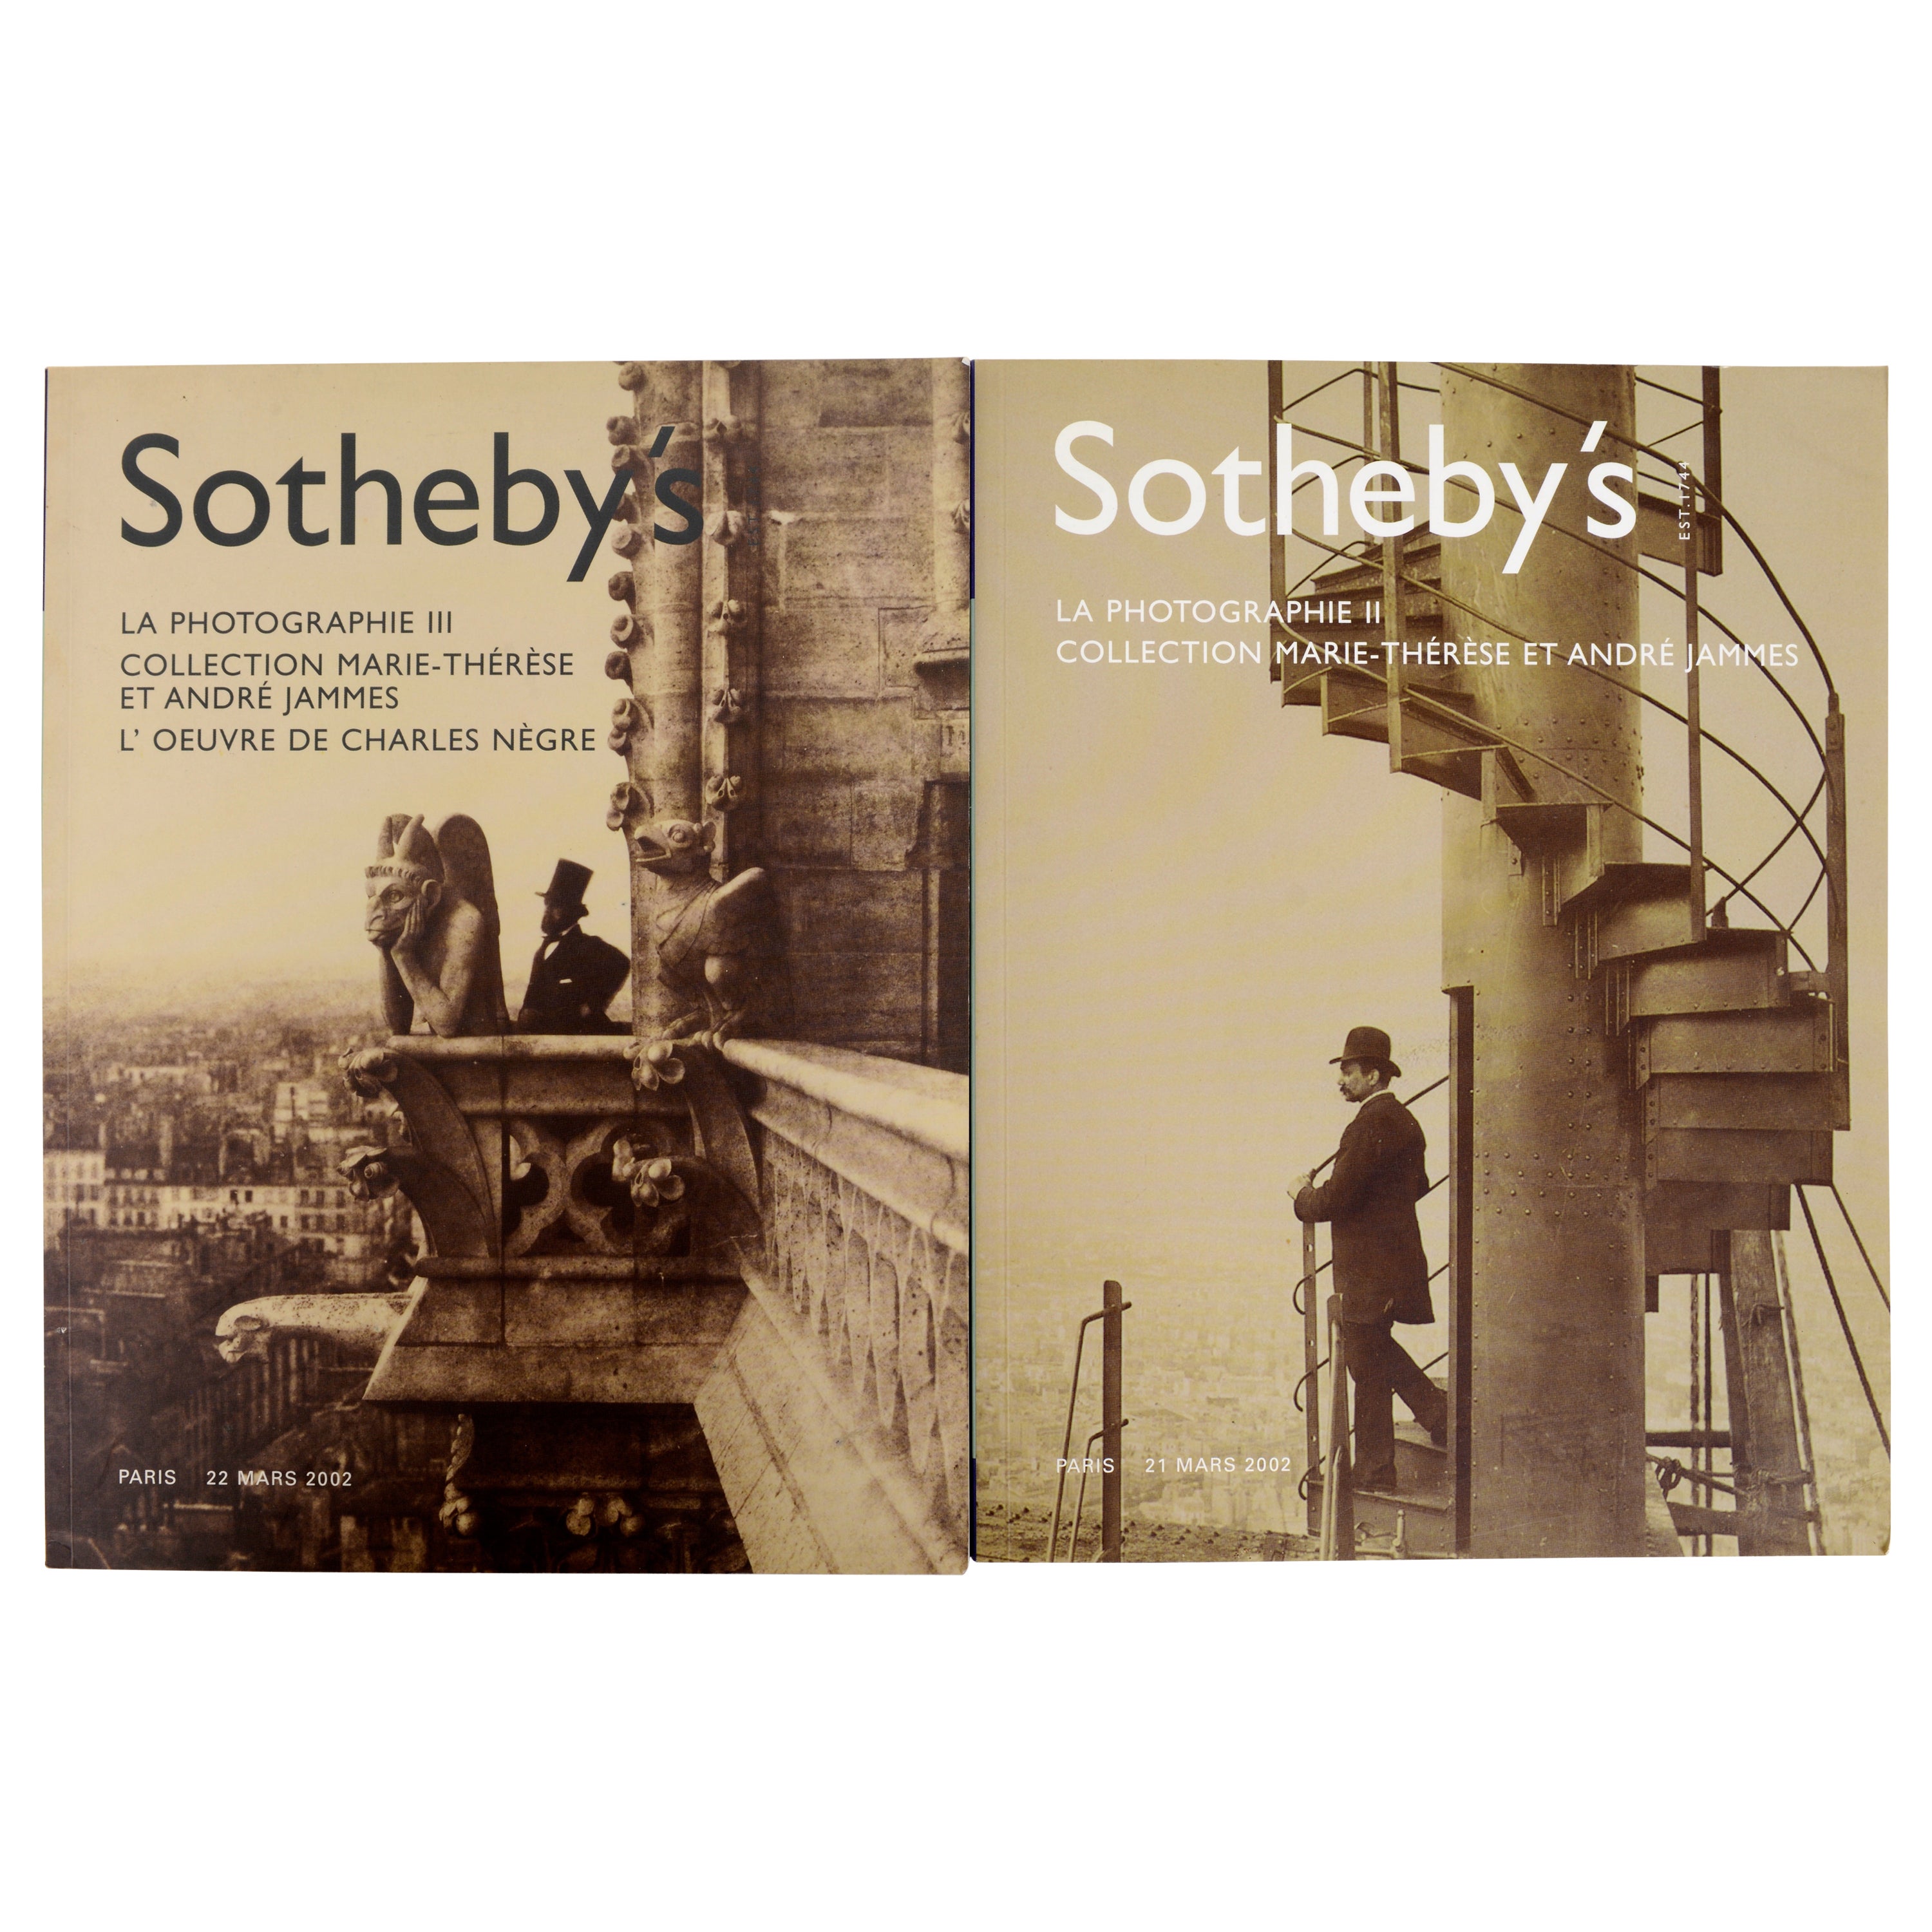 Sotheby's: La Photographie II/III Collection Marie-Therese Et Andree Jammes